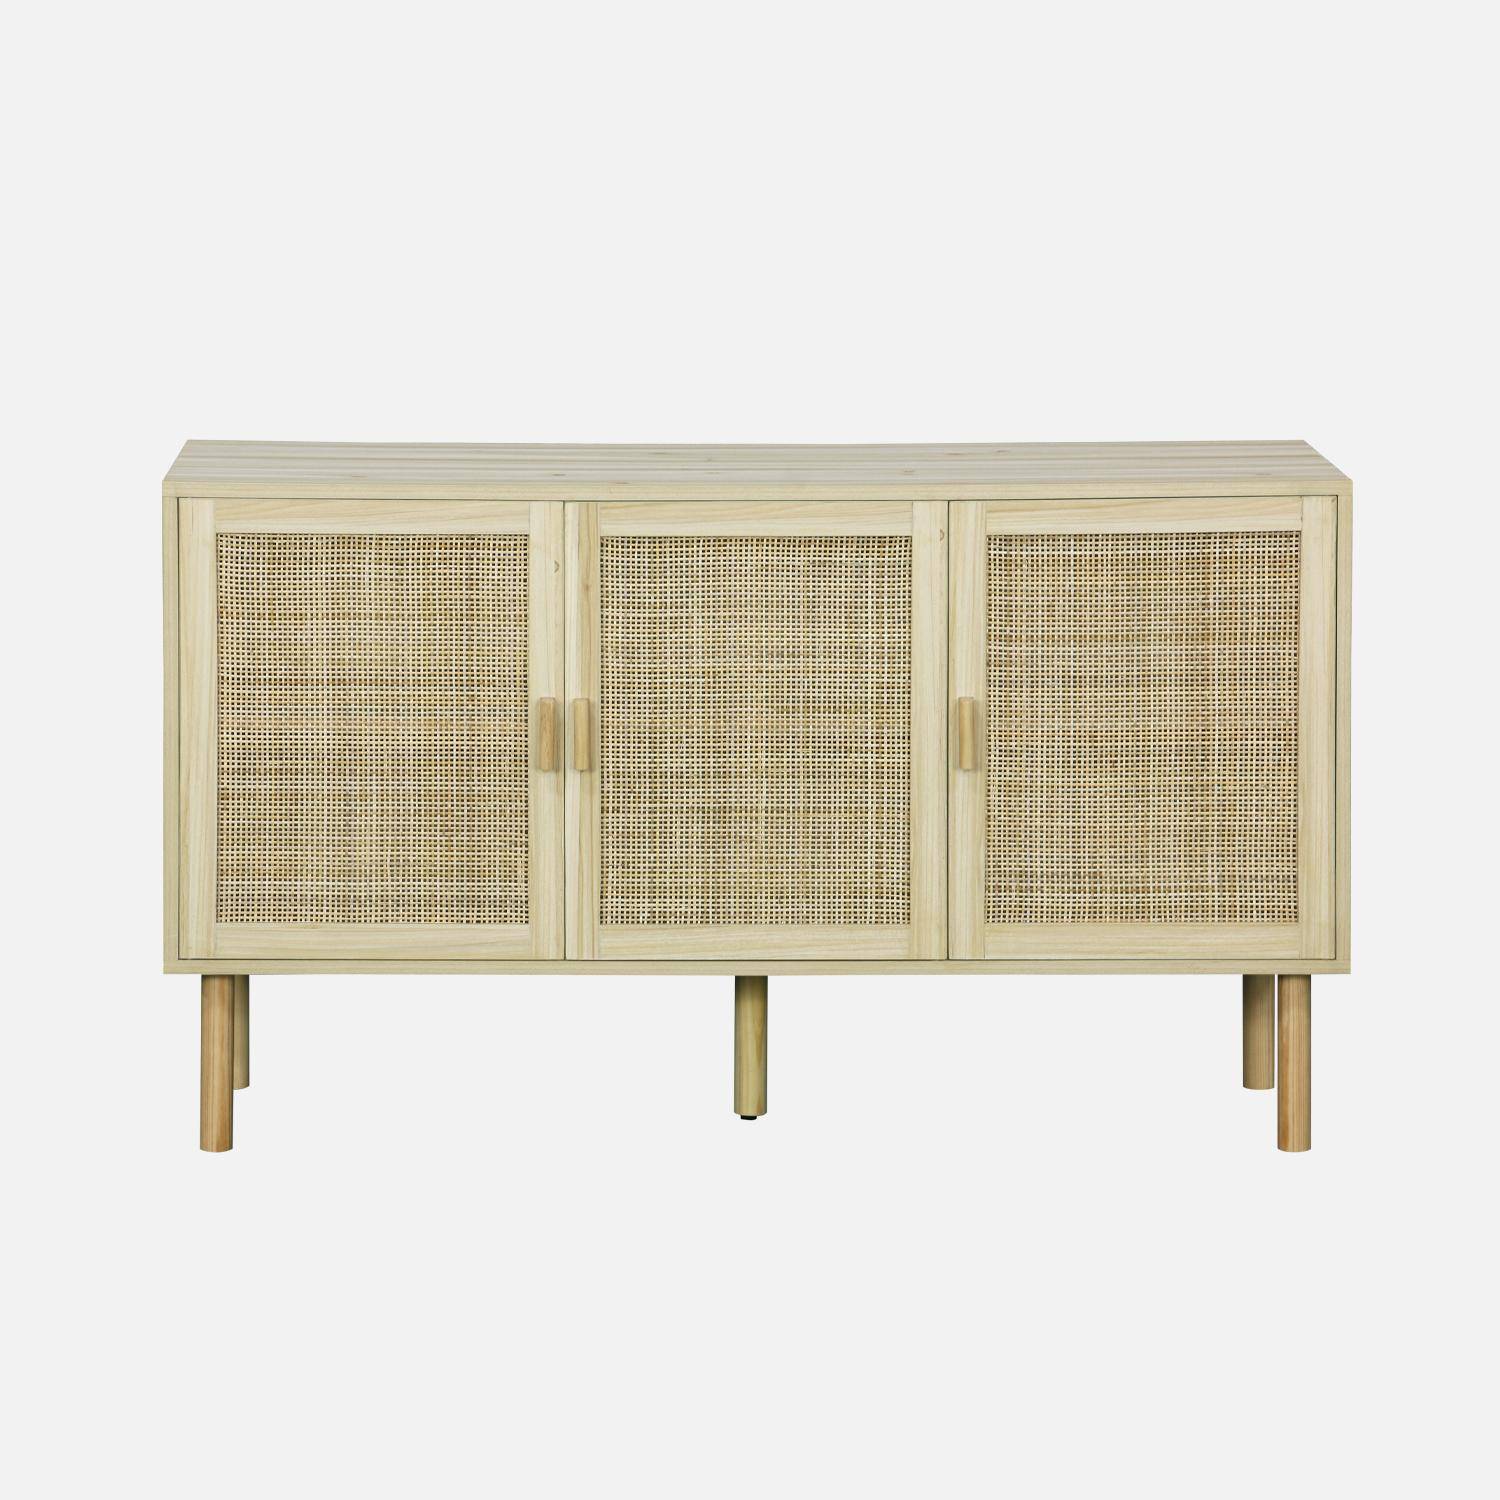 3-door sideboard with 3 shelves in cane and wood effect. Fir wood legs and handles. W 120 x D 39 x H 70cm CAMARGUE,sweeek,Photo2